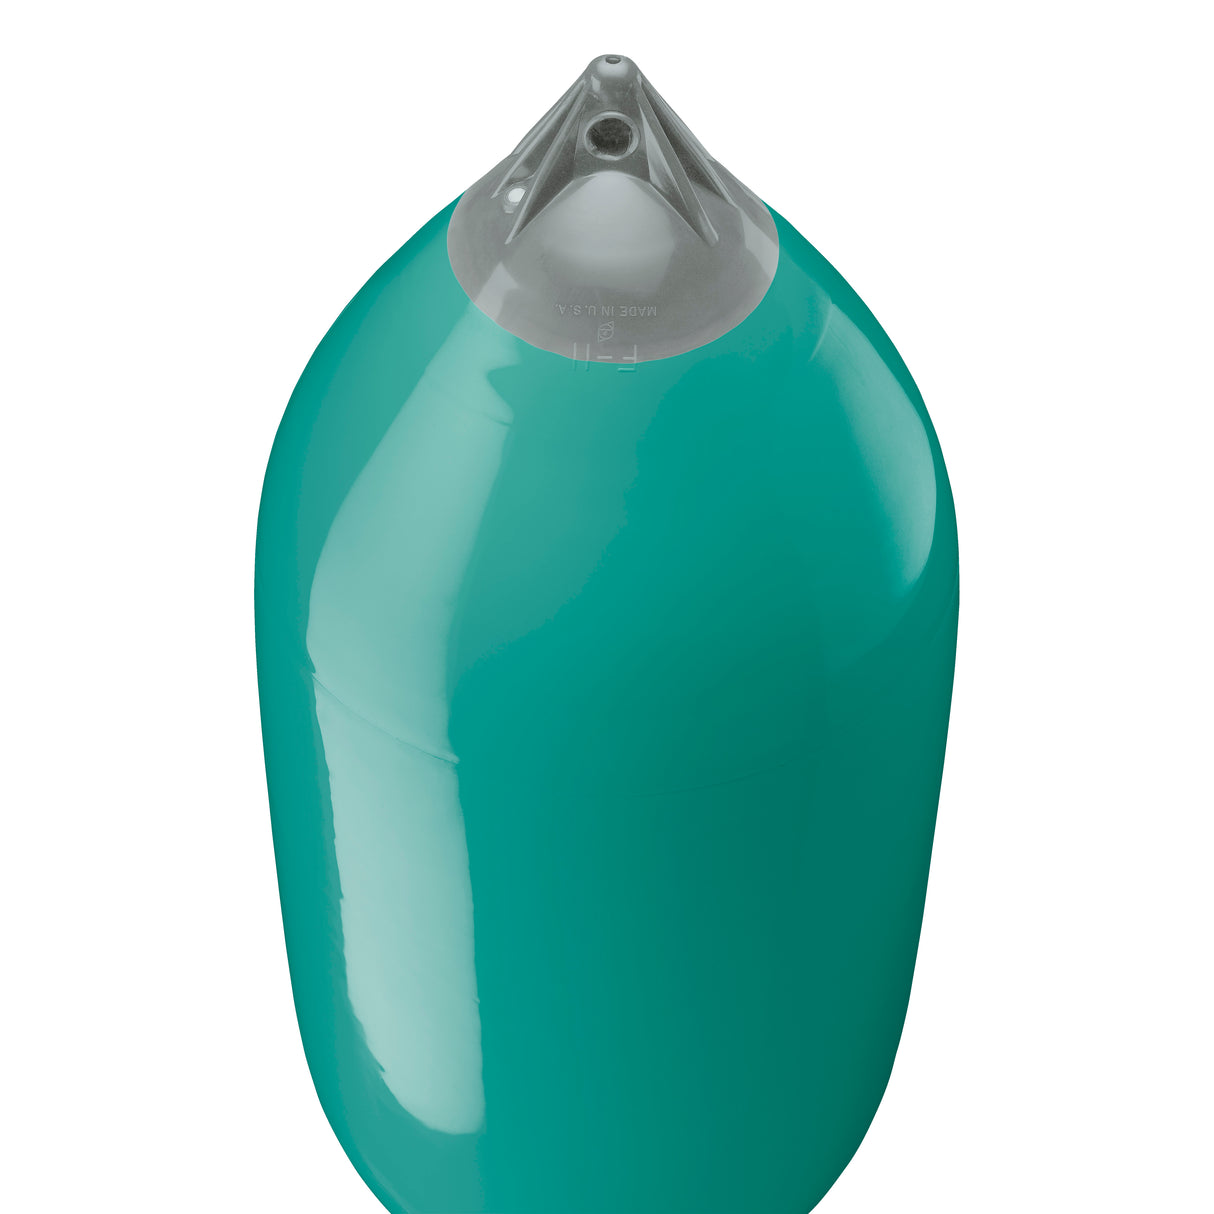 Teal boat fender with Grey-Top, Polyform F-11 angled shot